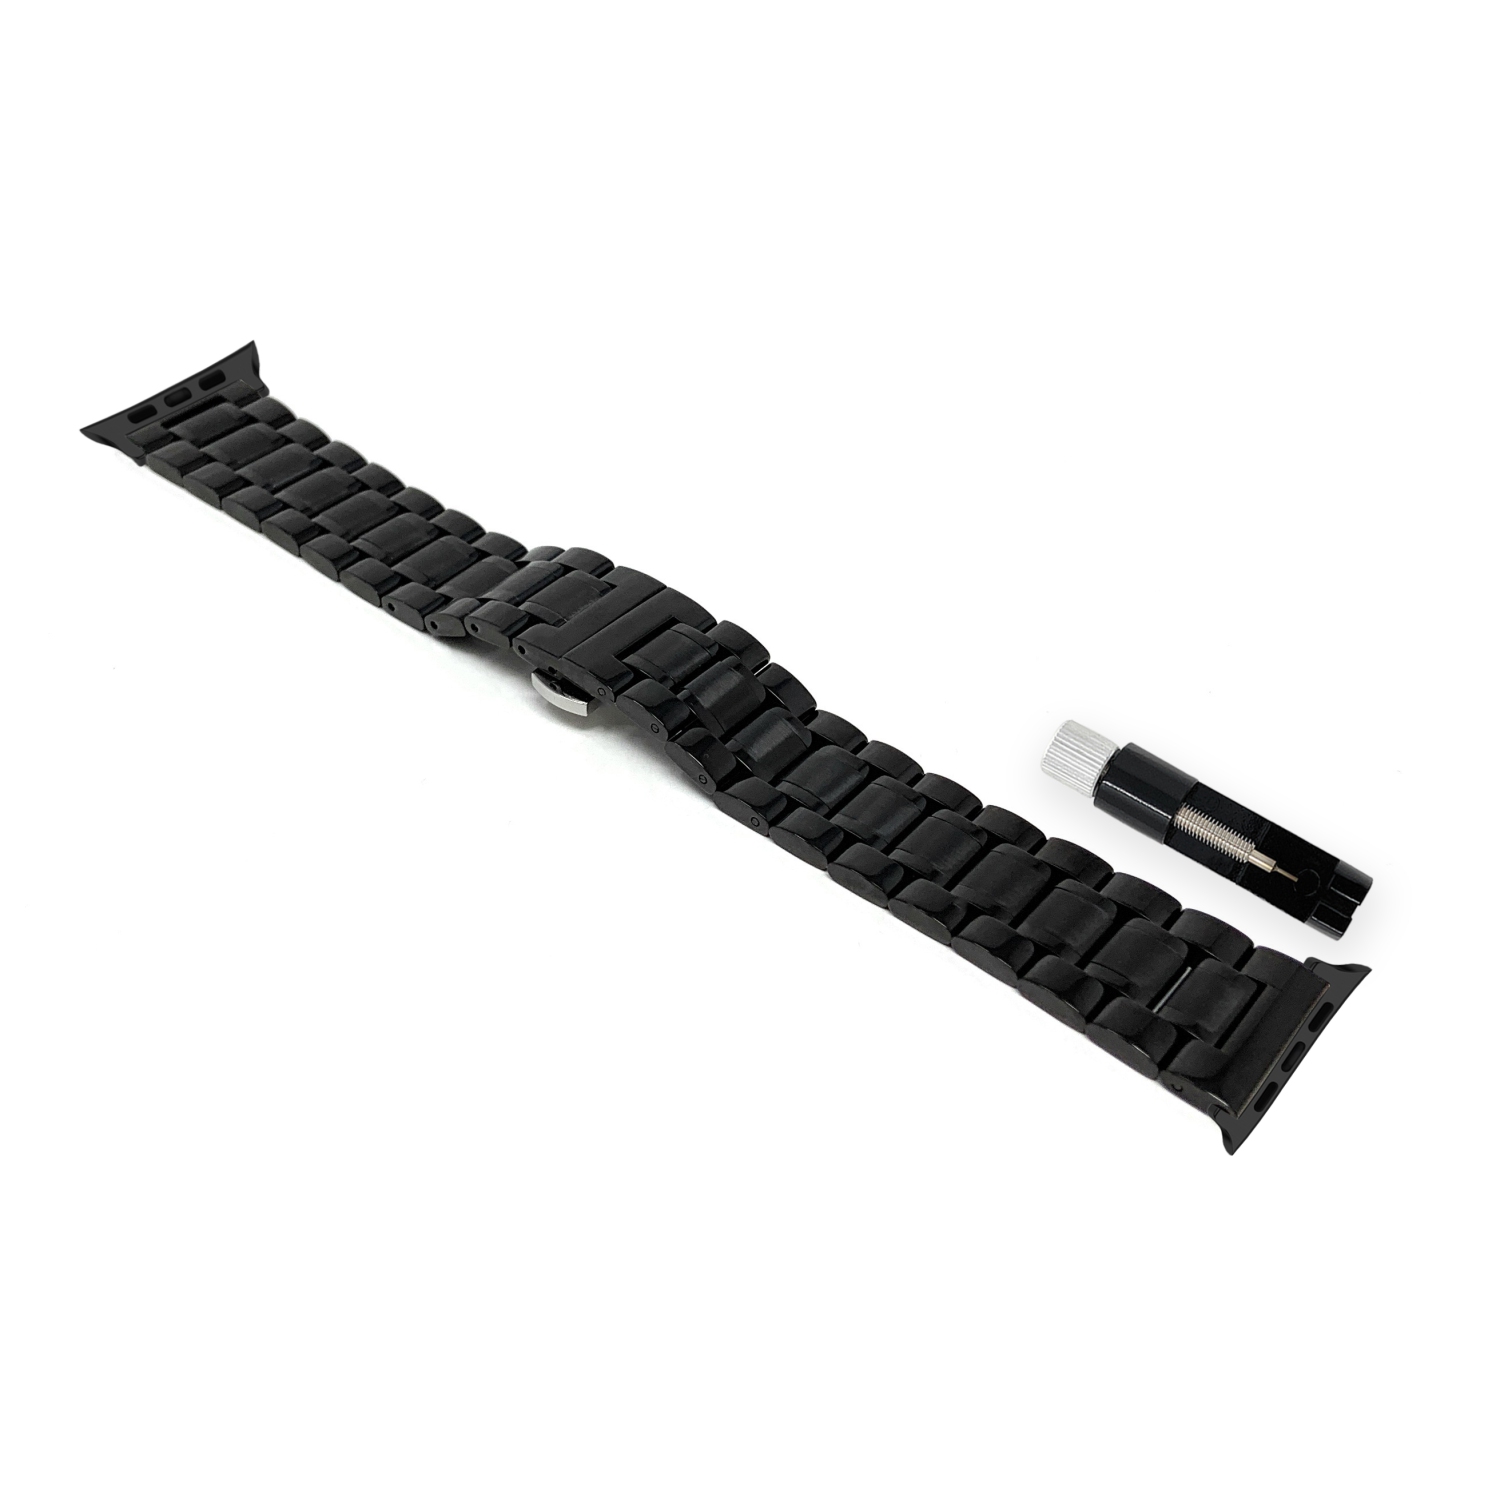 Bandini Stainless Steel Metal Replacement Watch Strap for Apple Watch Band 42mm / 44mm, Series 6 5 4 3 2 1 - Black / Black